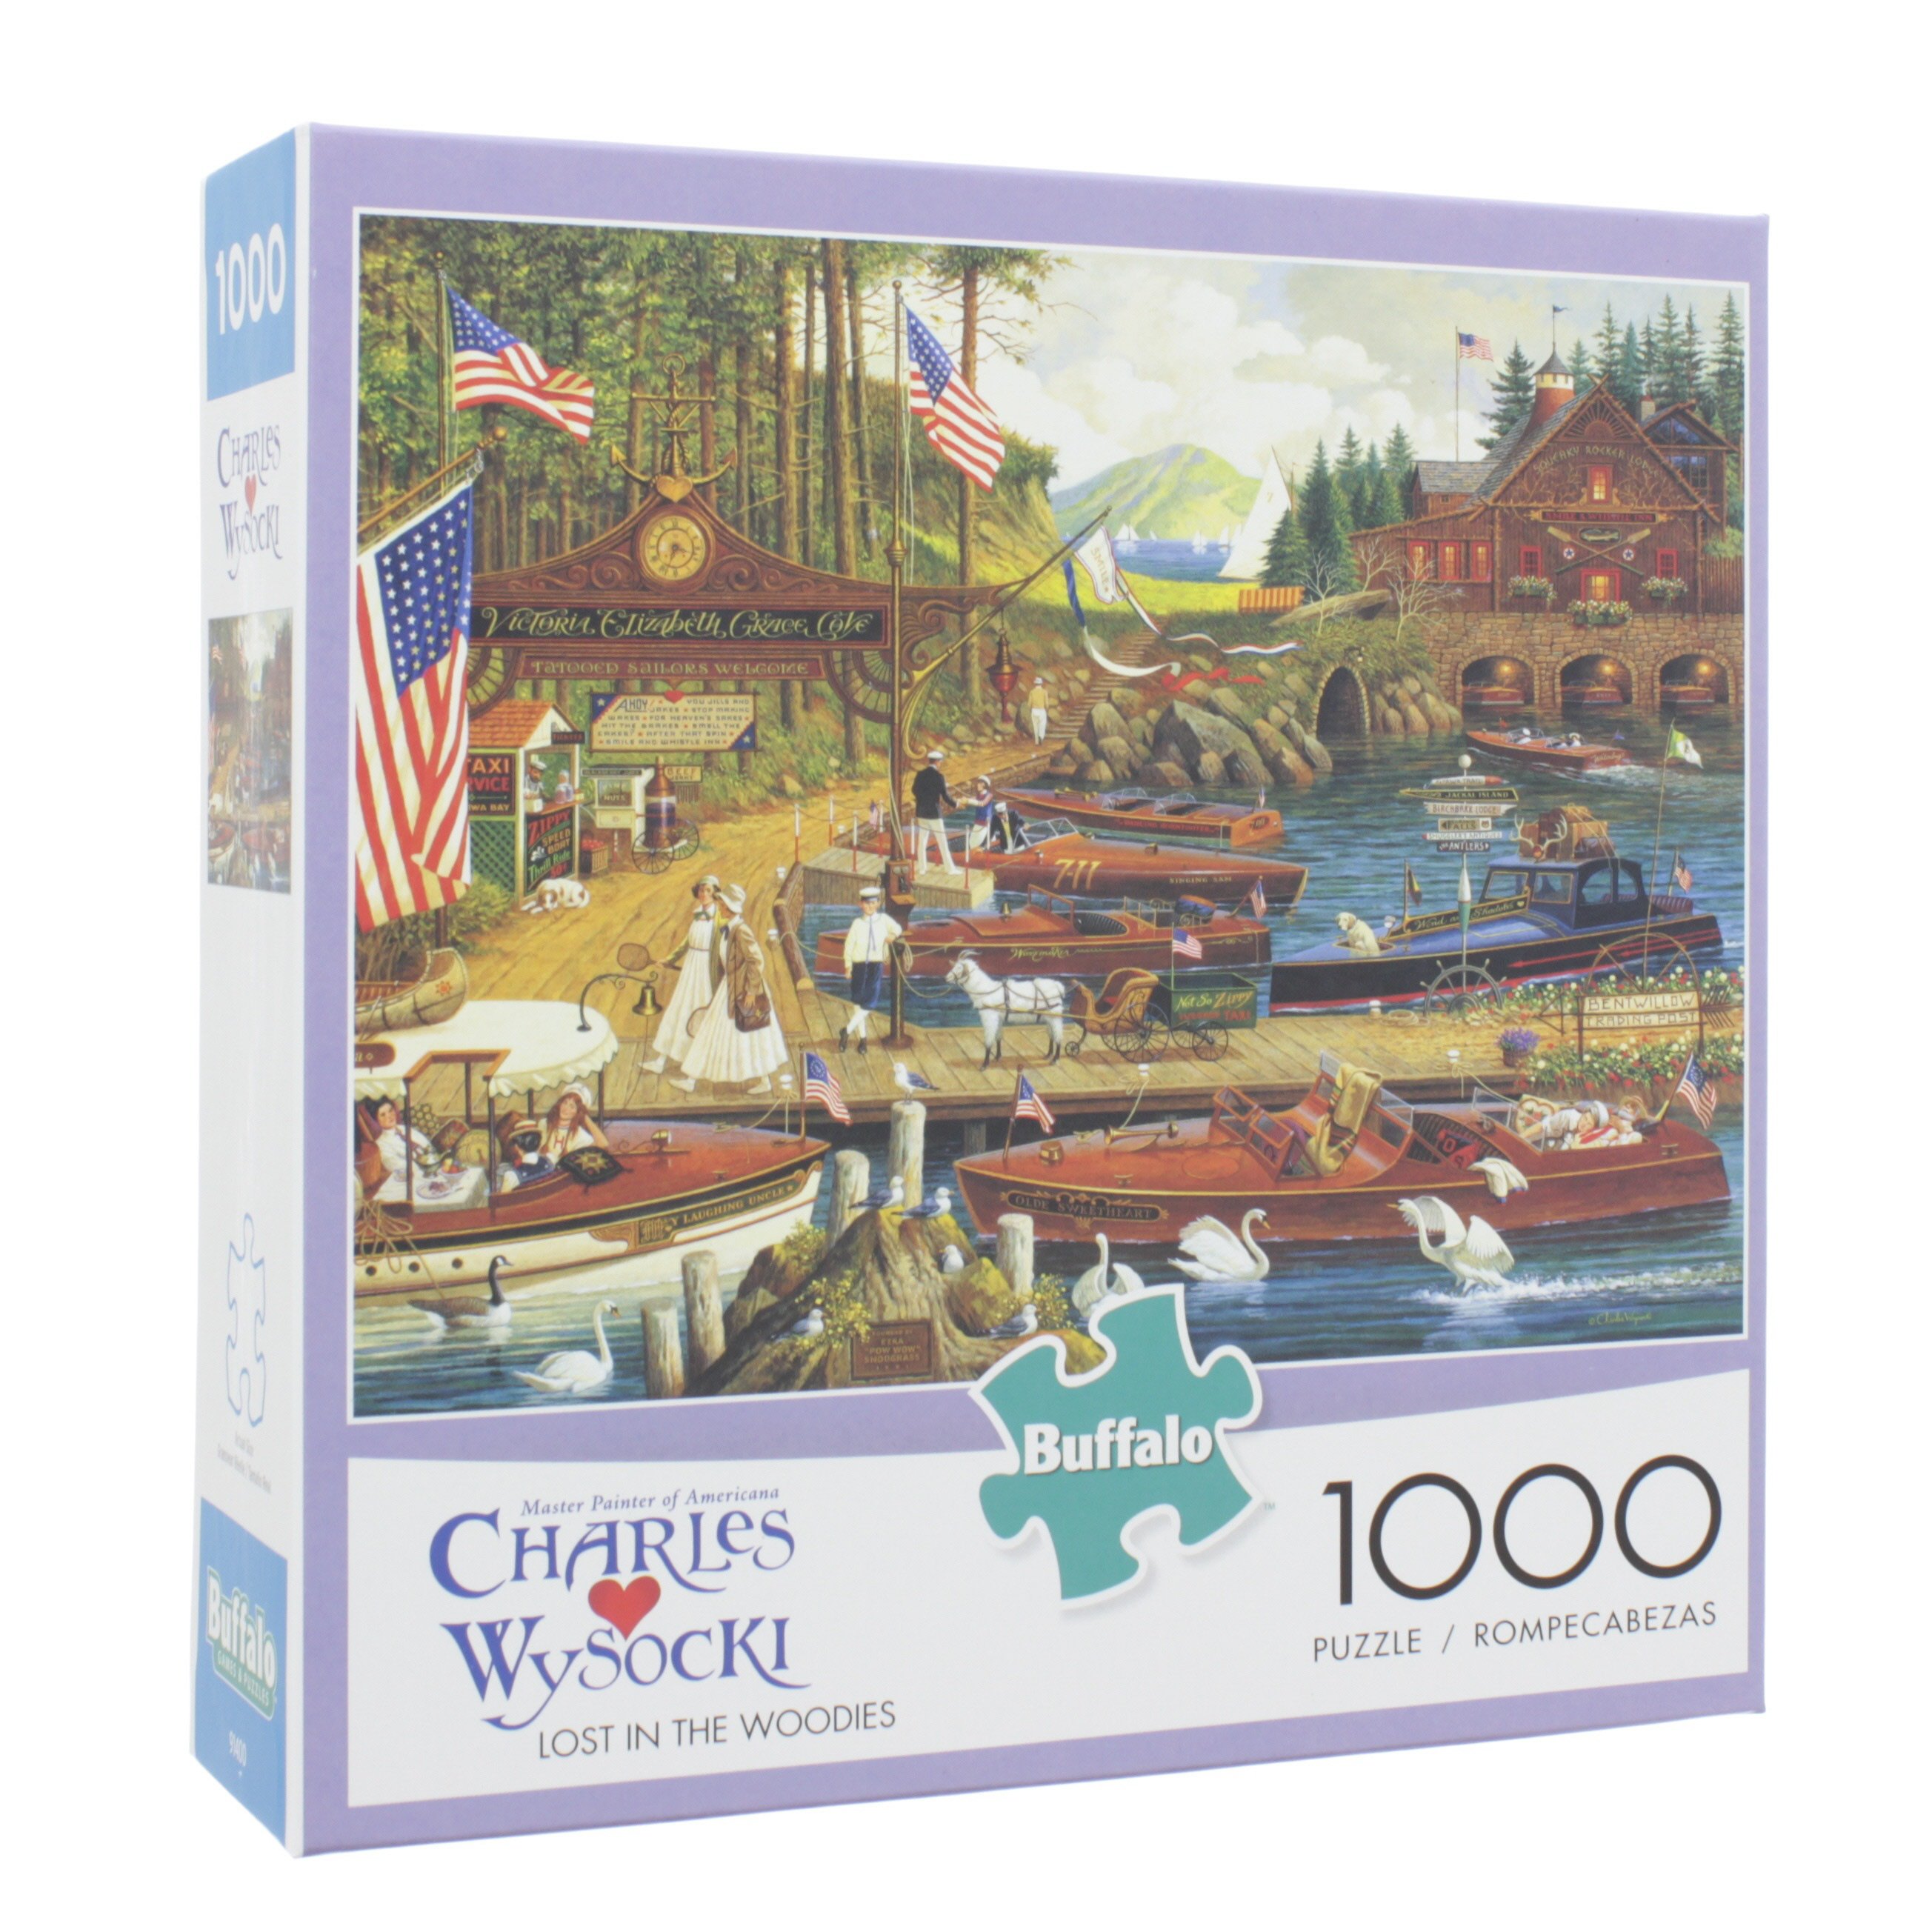 Buffalo Games Lost in the Woodies Charles Wysocki 1000 Piece 